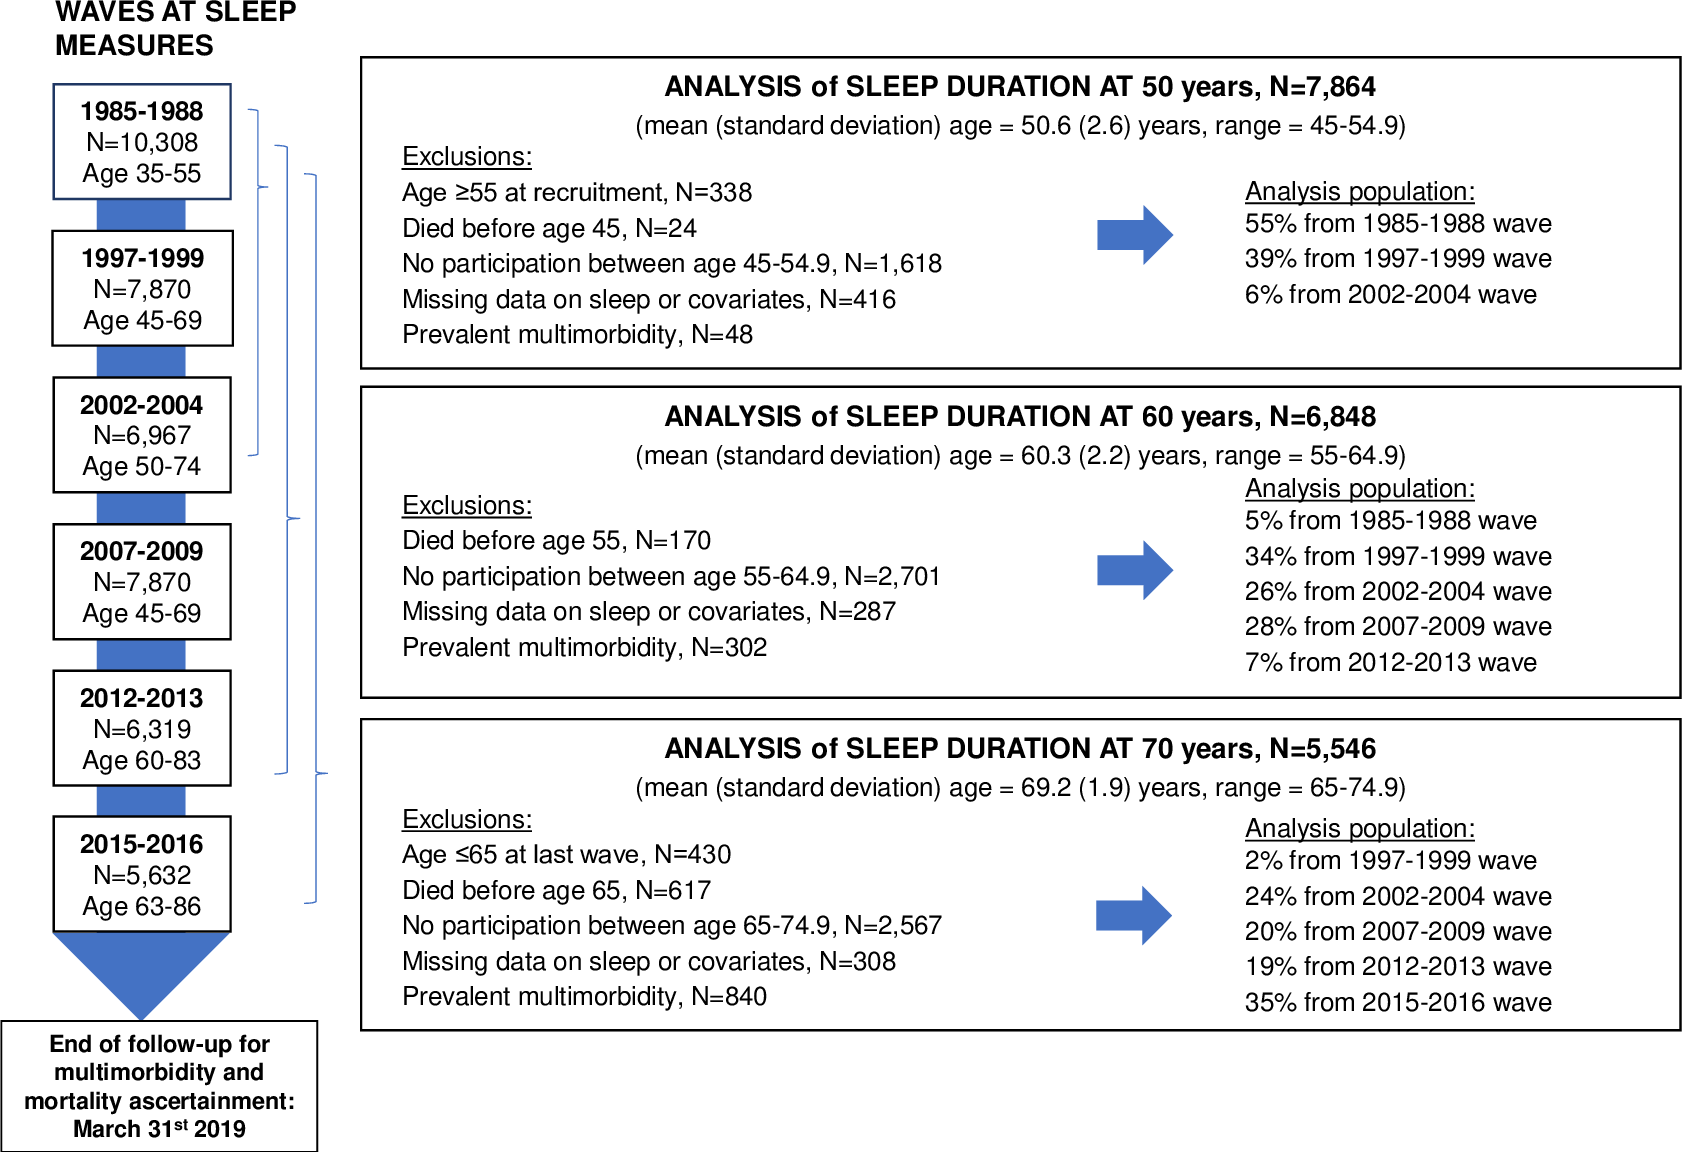 Flowchart for analyses on the association between sleep duration at age 50, 60, and 70 and risk of multimorbidity.